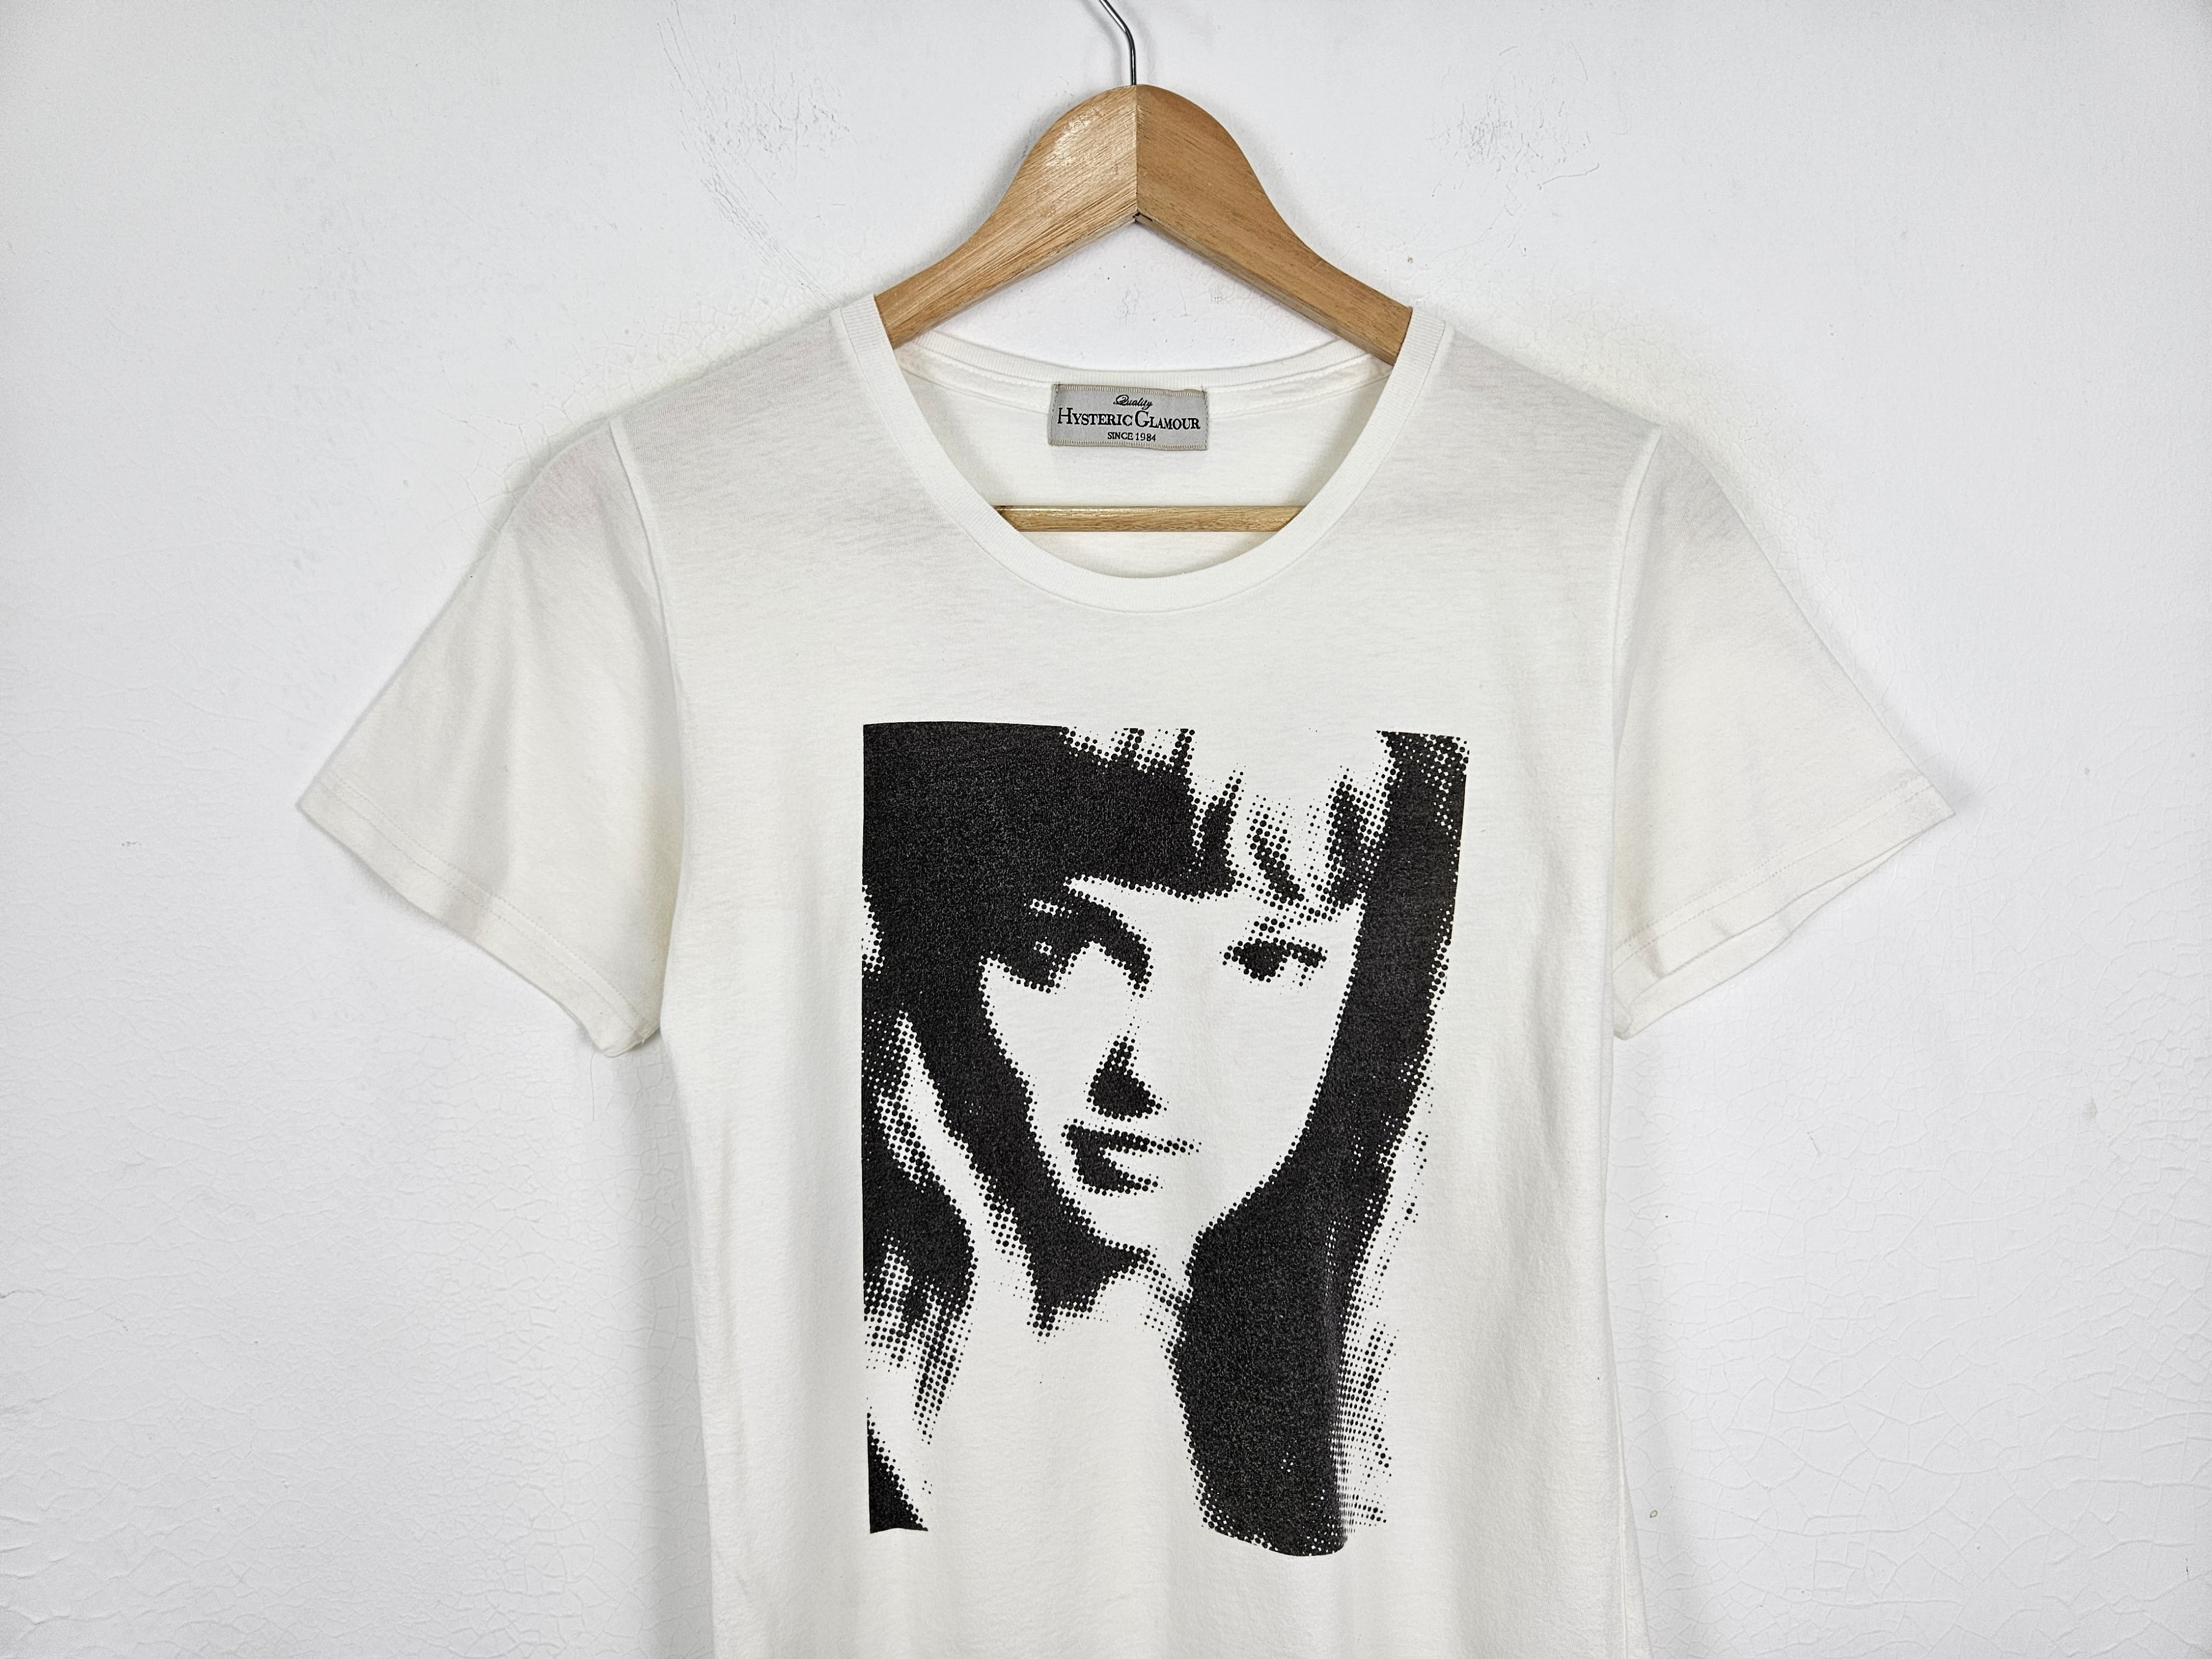 Hysteric Glamour shirt - 3